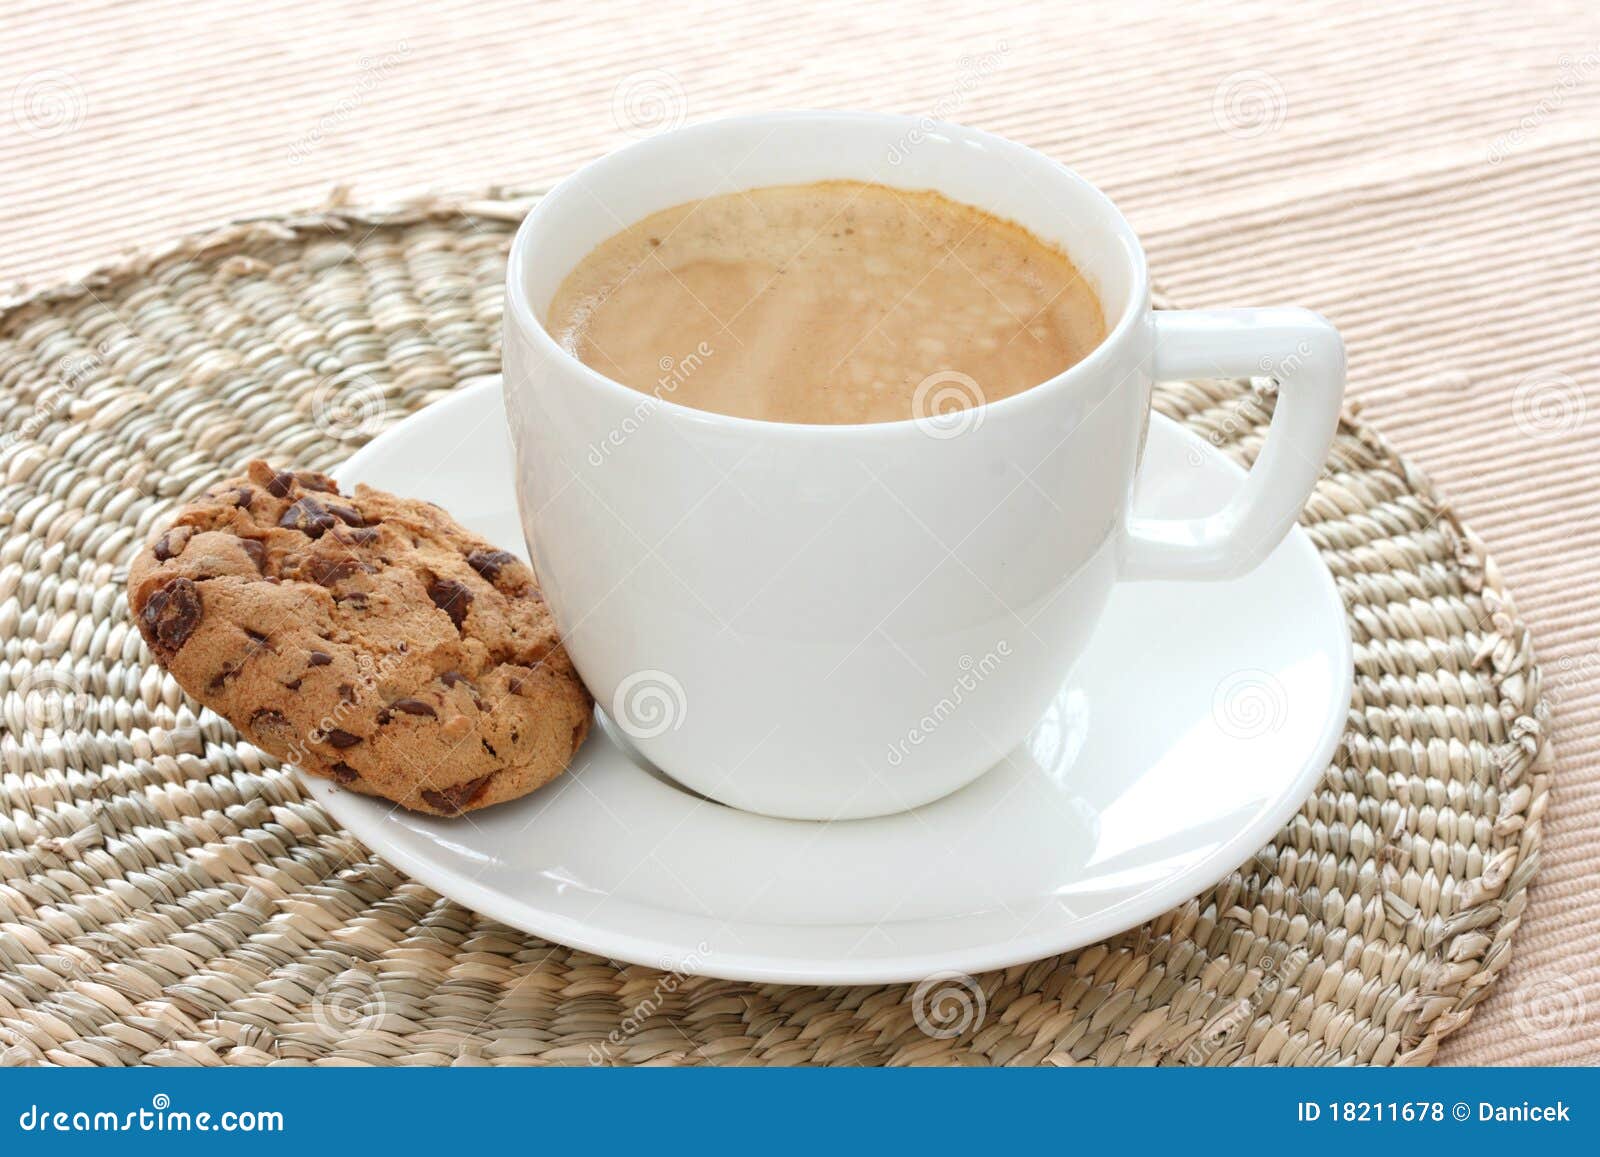 free clipart coffee and cookies - photo #11